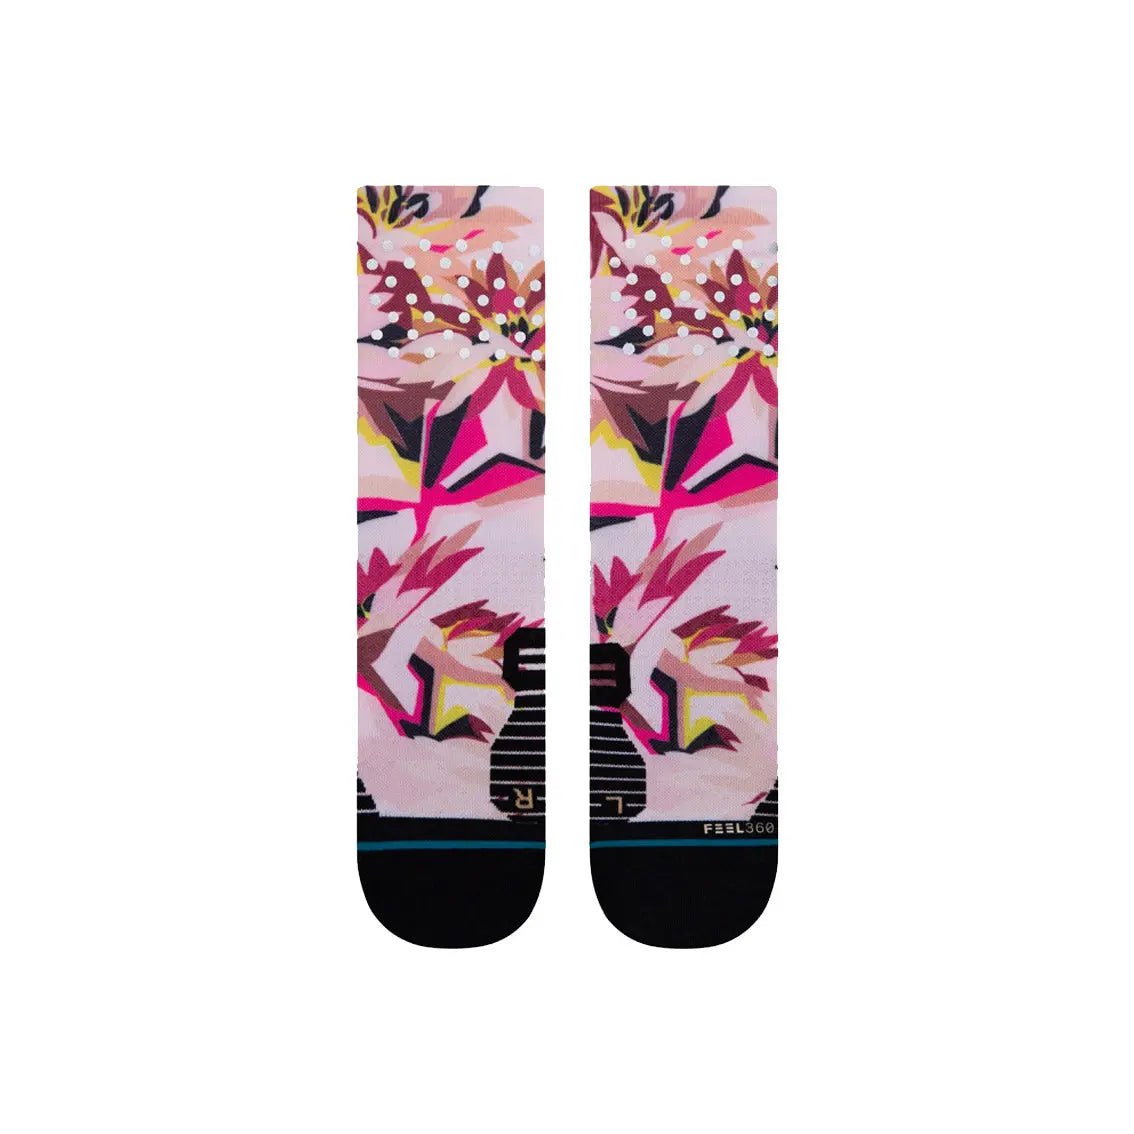 Womens Stance Performance Crew Sock - White / Pink / Silver